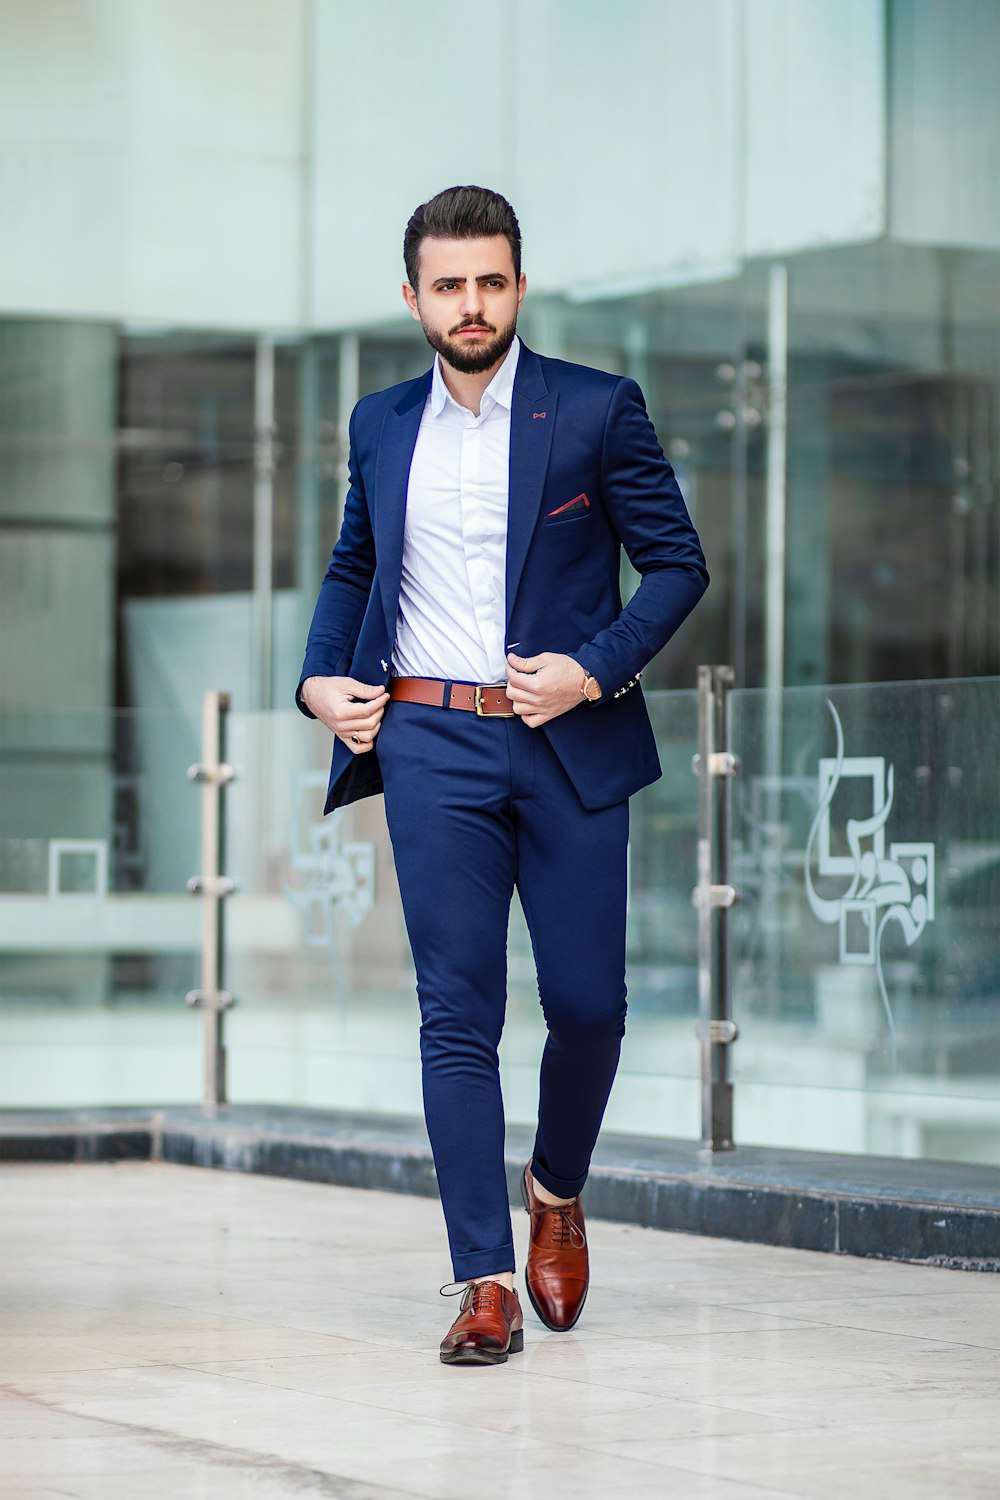 500+ Mens Fashion Pictures [HD] | Download Free Images on Unsplash